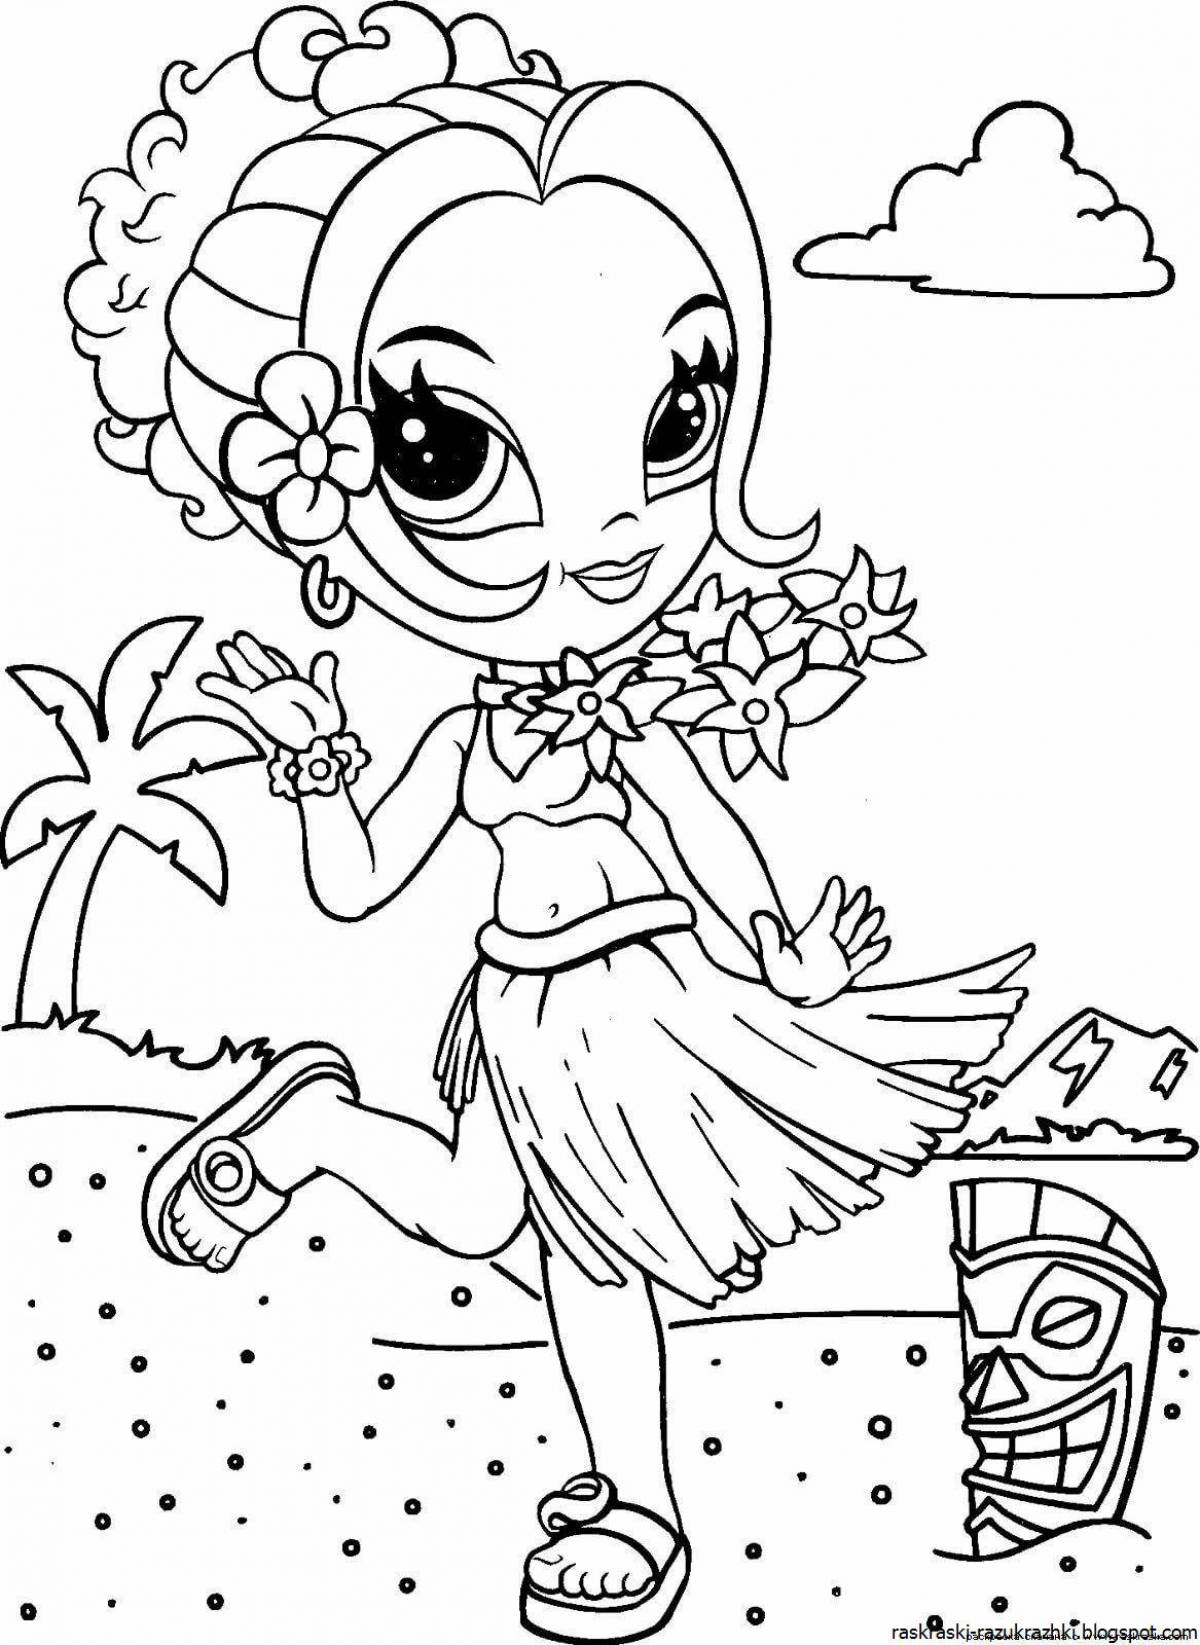 Intriguing coloring book for girls